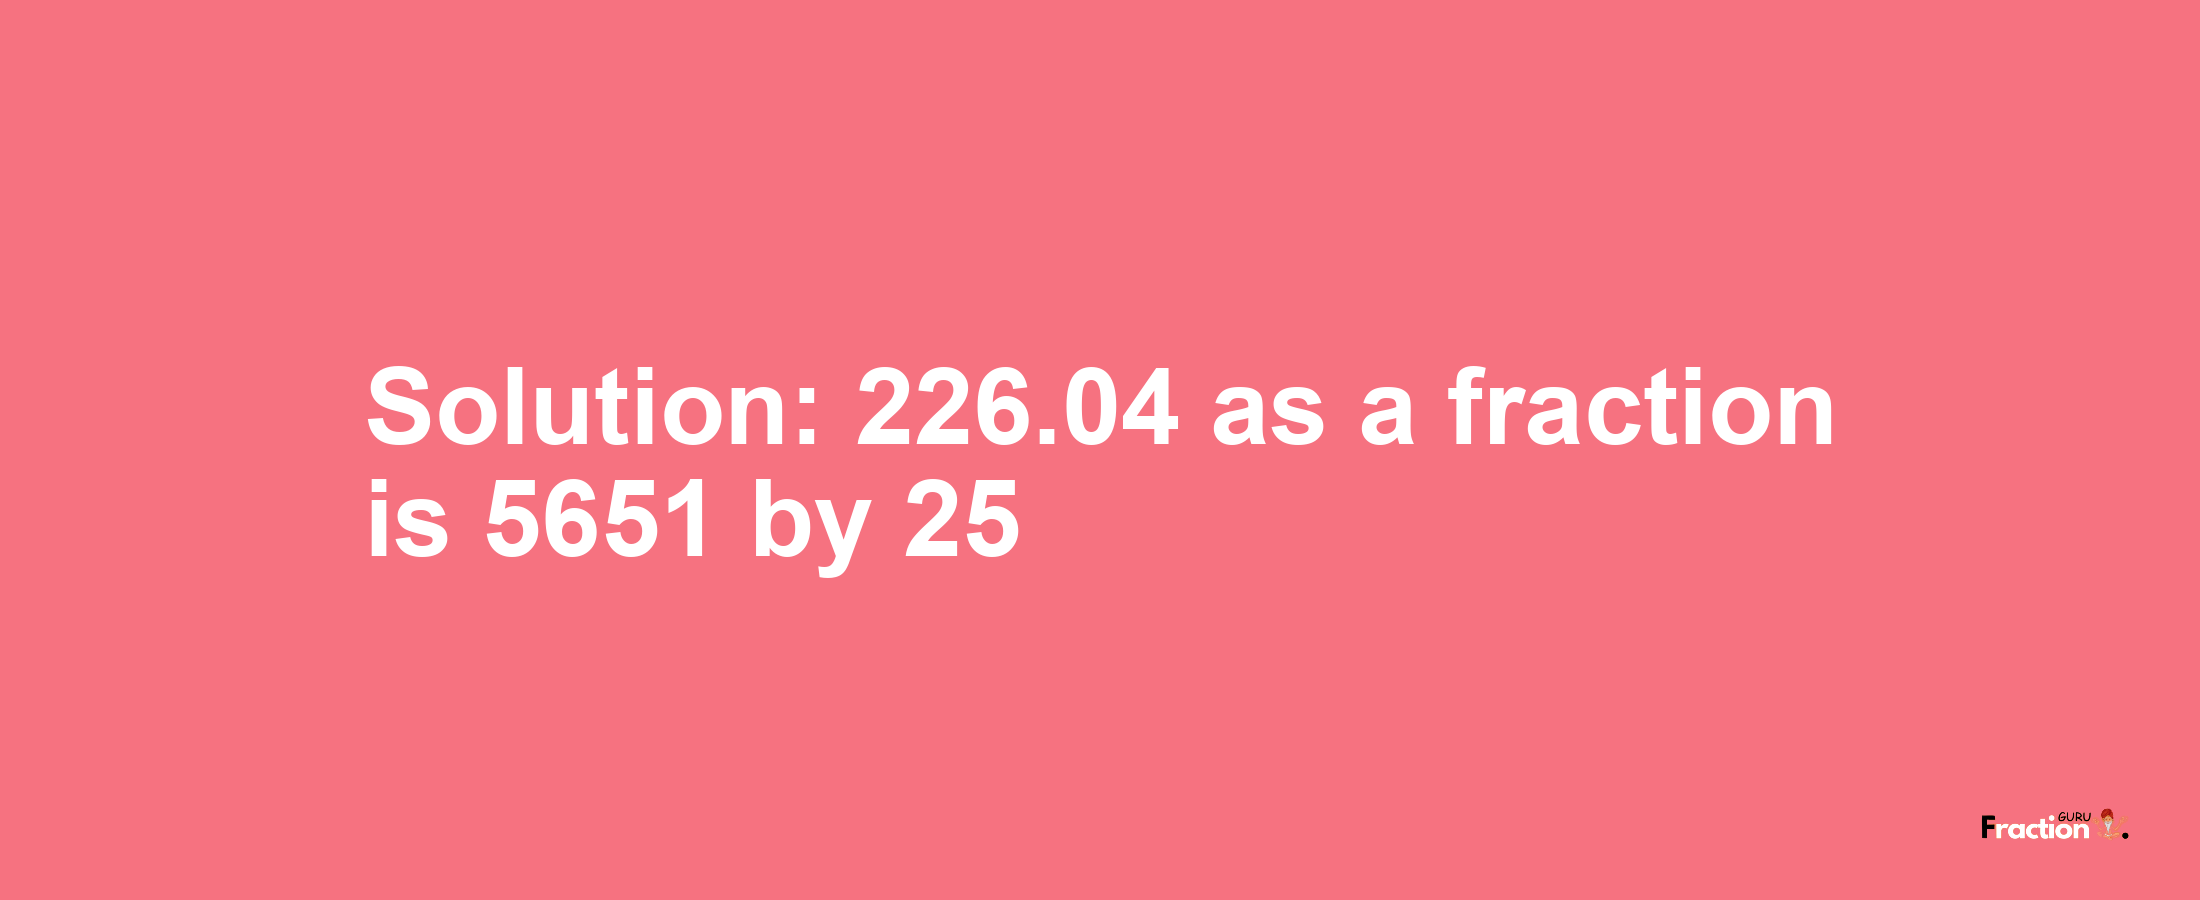 Solution:226.04 as a fraction is 5651/25